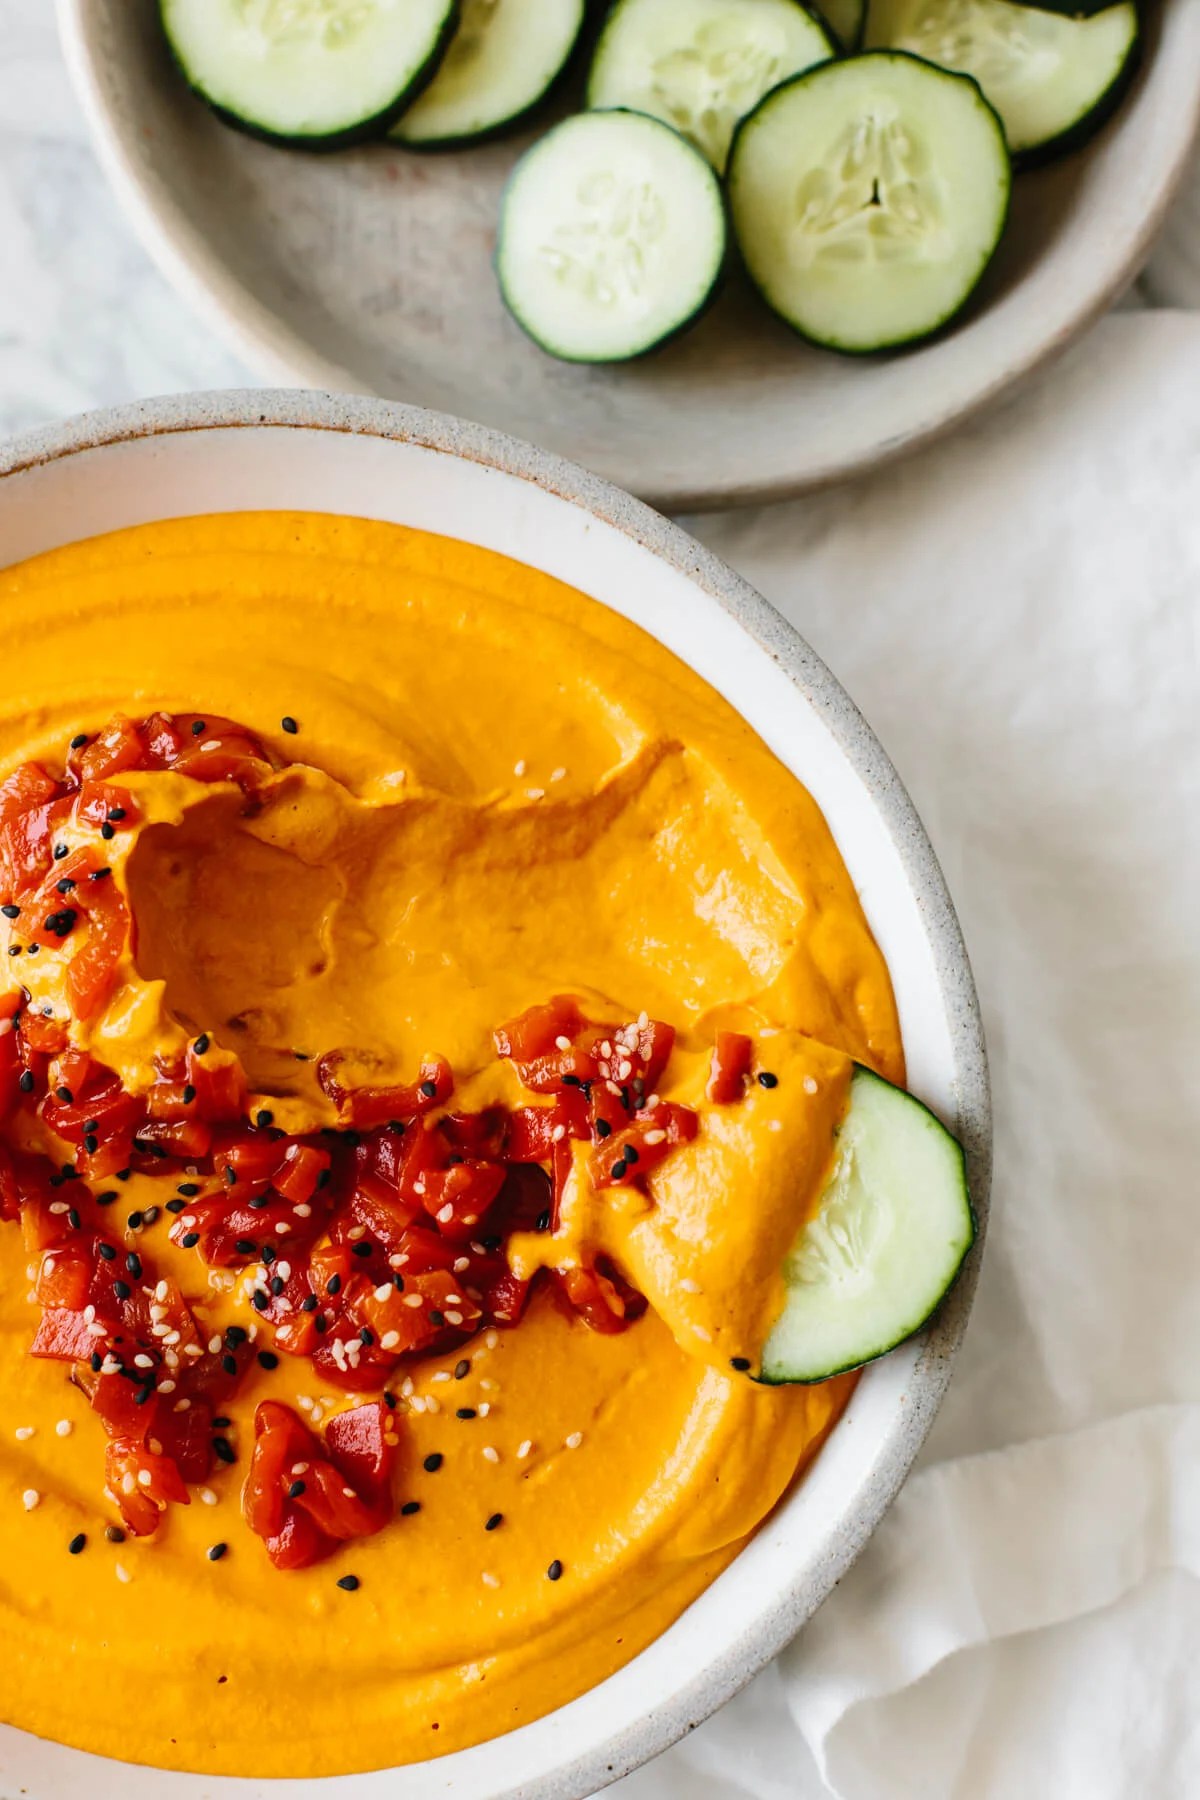 Roasted red pepper hummus is incredibly easy to make at home with just a few ingredients. It's creamy, smooth, slightly smoky and full of flavor - a great healthy snack recipe!